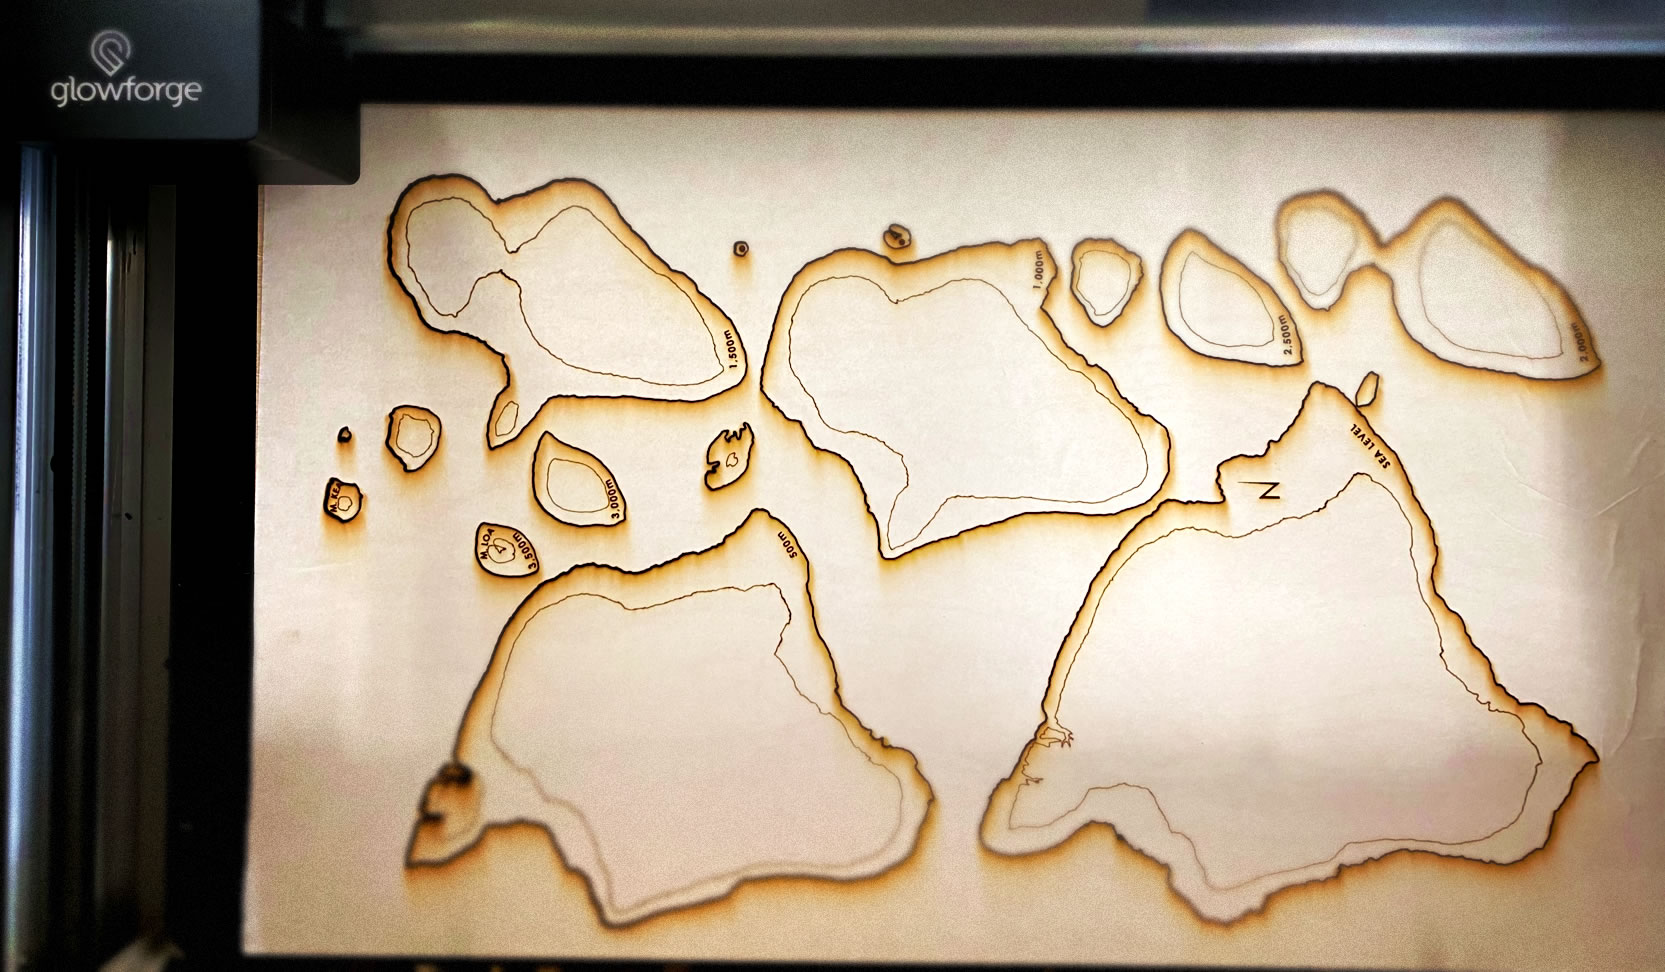 Laser cutter with contours cut and stacking reference lines etched.